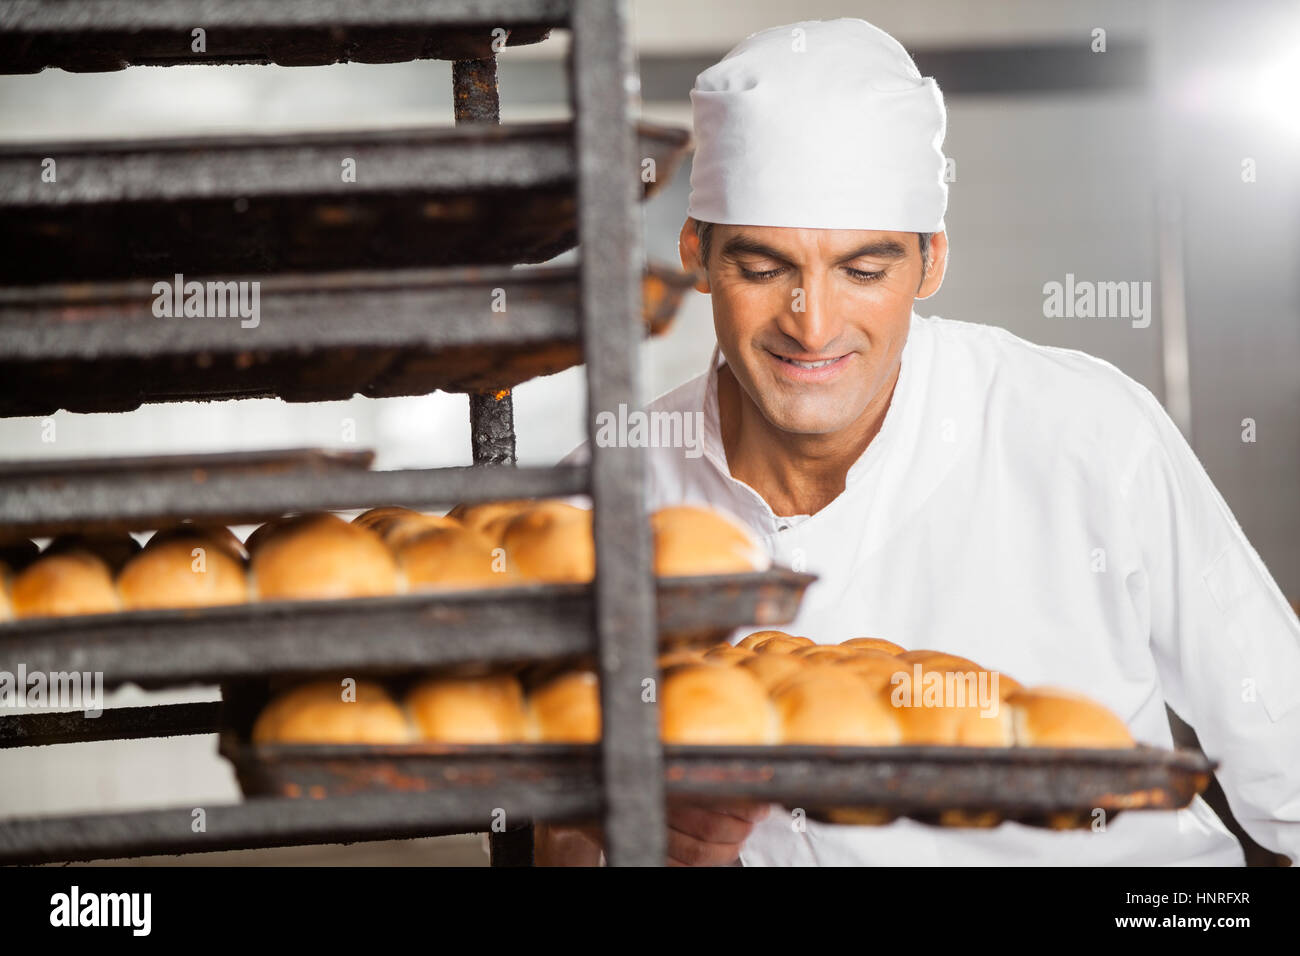 Smiling Baker Removing Baking Tray From Rack Stock Photo